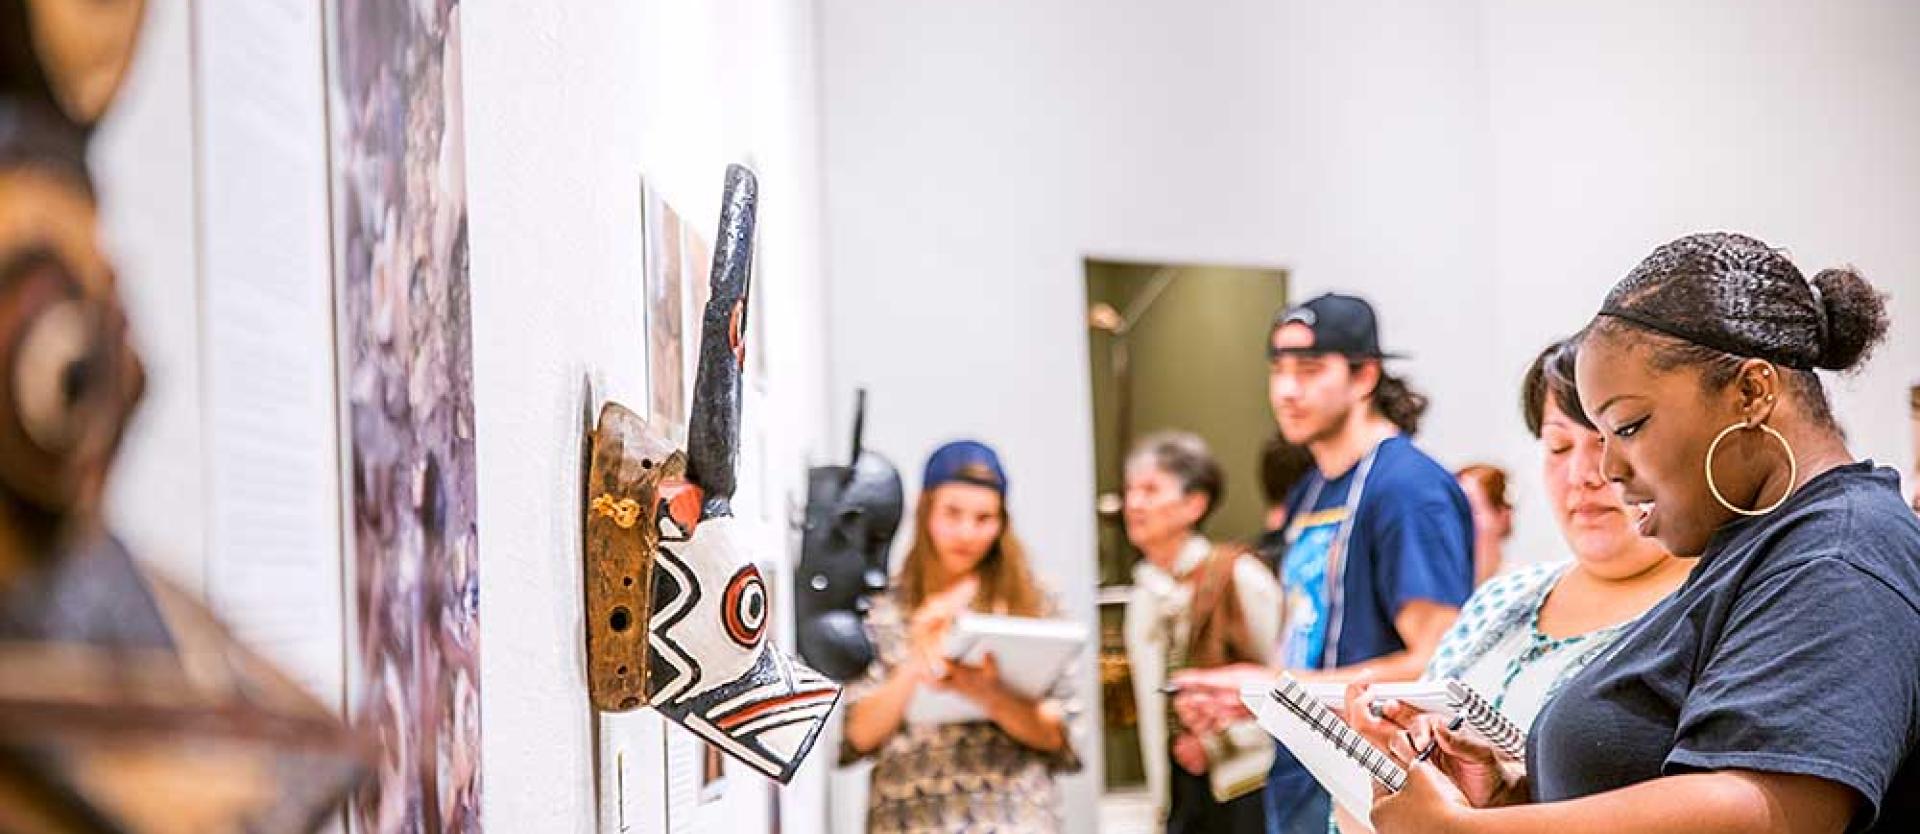 The Reese Bullen Gallery offers hands on learning opportunities for Art majors